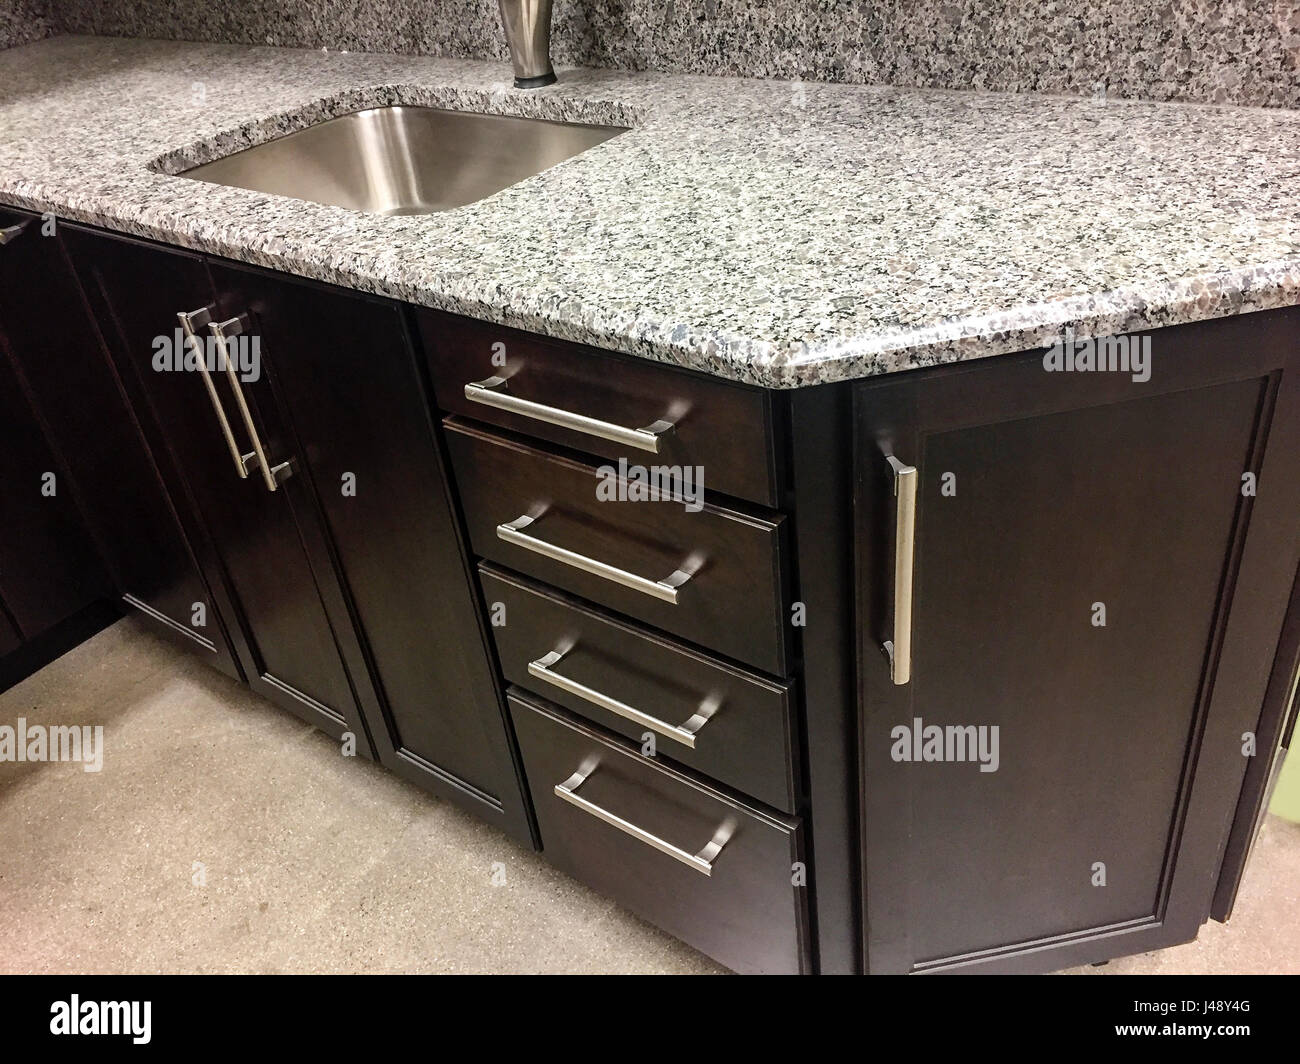 Kitchen cabinets with quartz countertop with sink and faucet Stock Photo